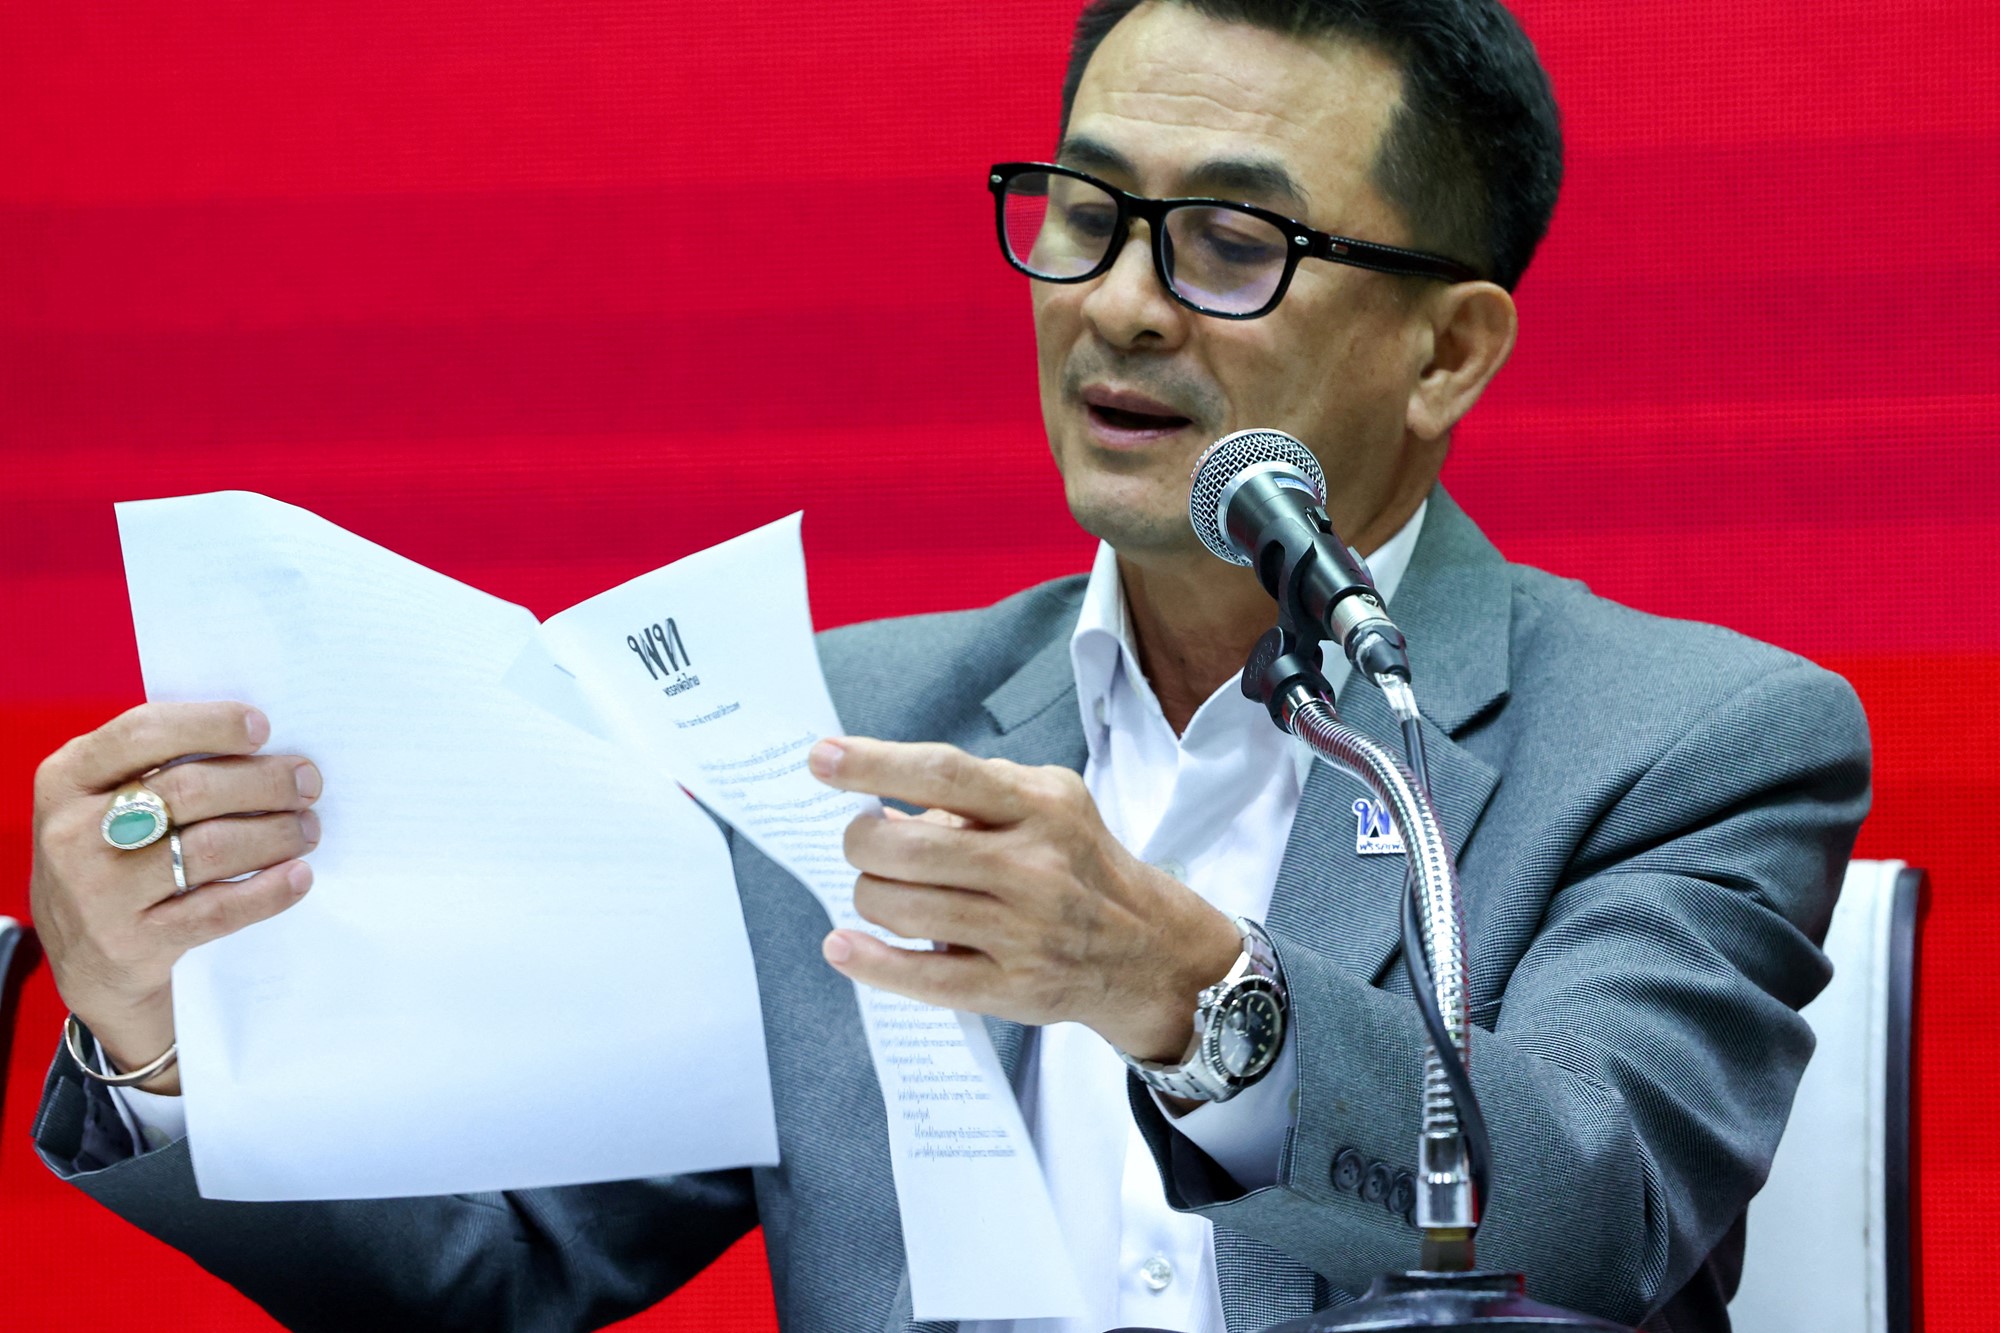 A man in a grey suit, glasses holds a piece of paper and speaks into a mic